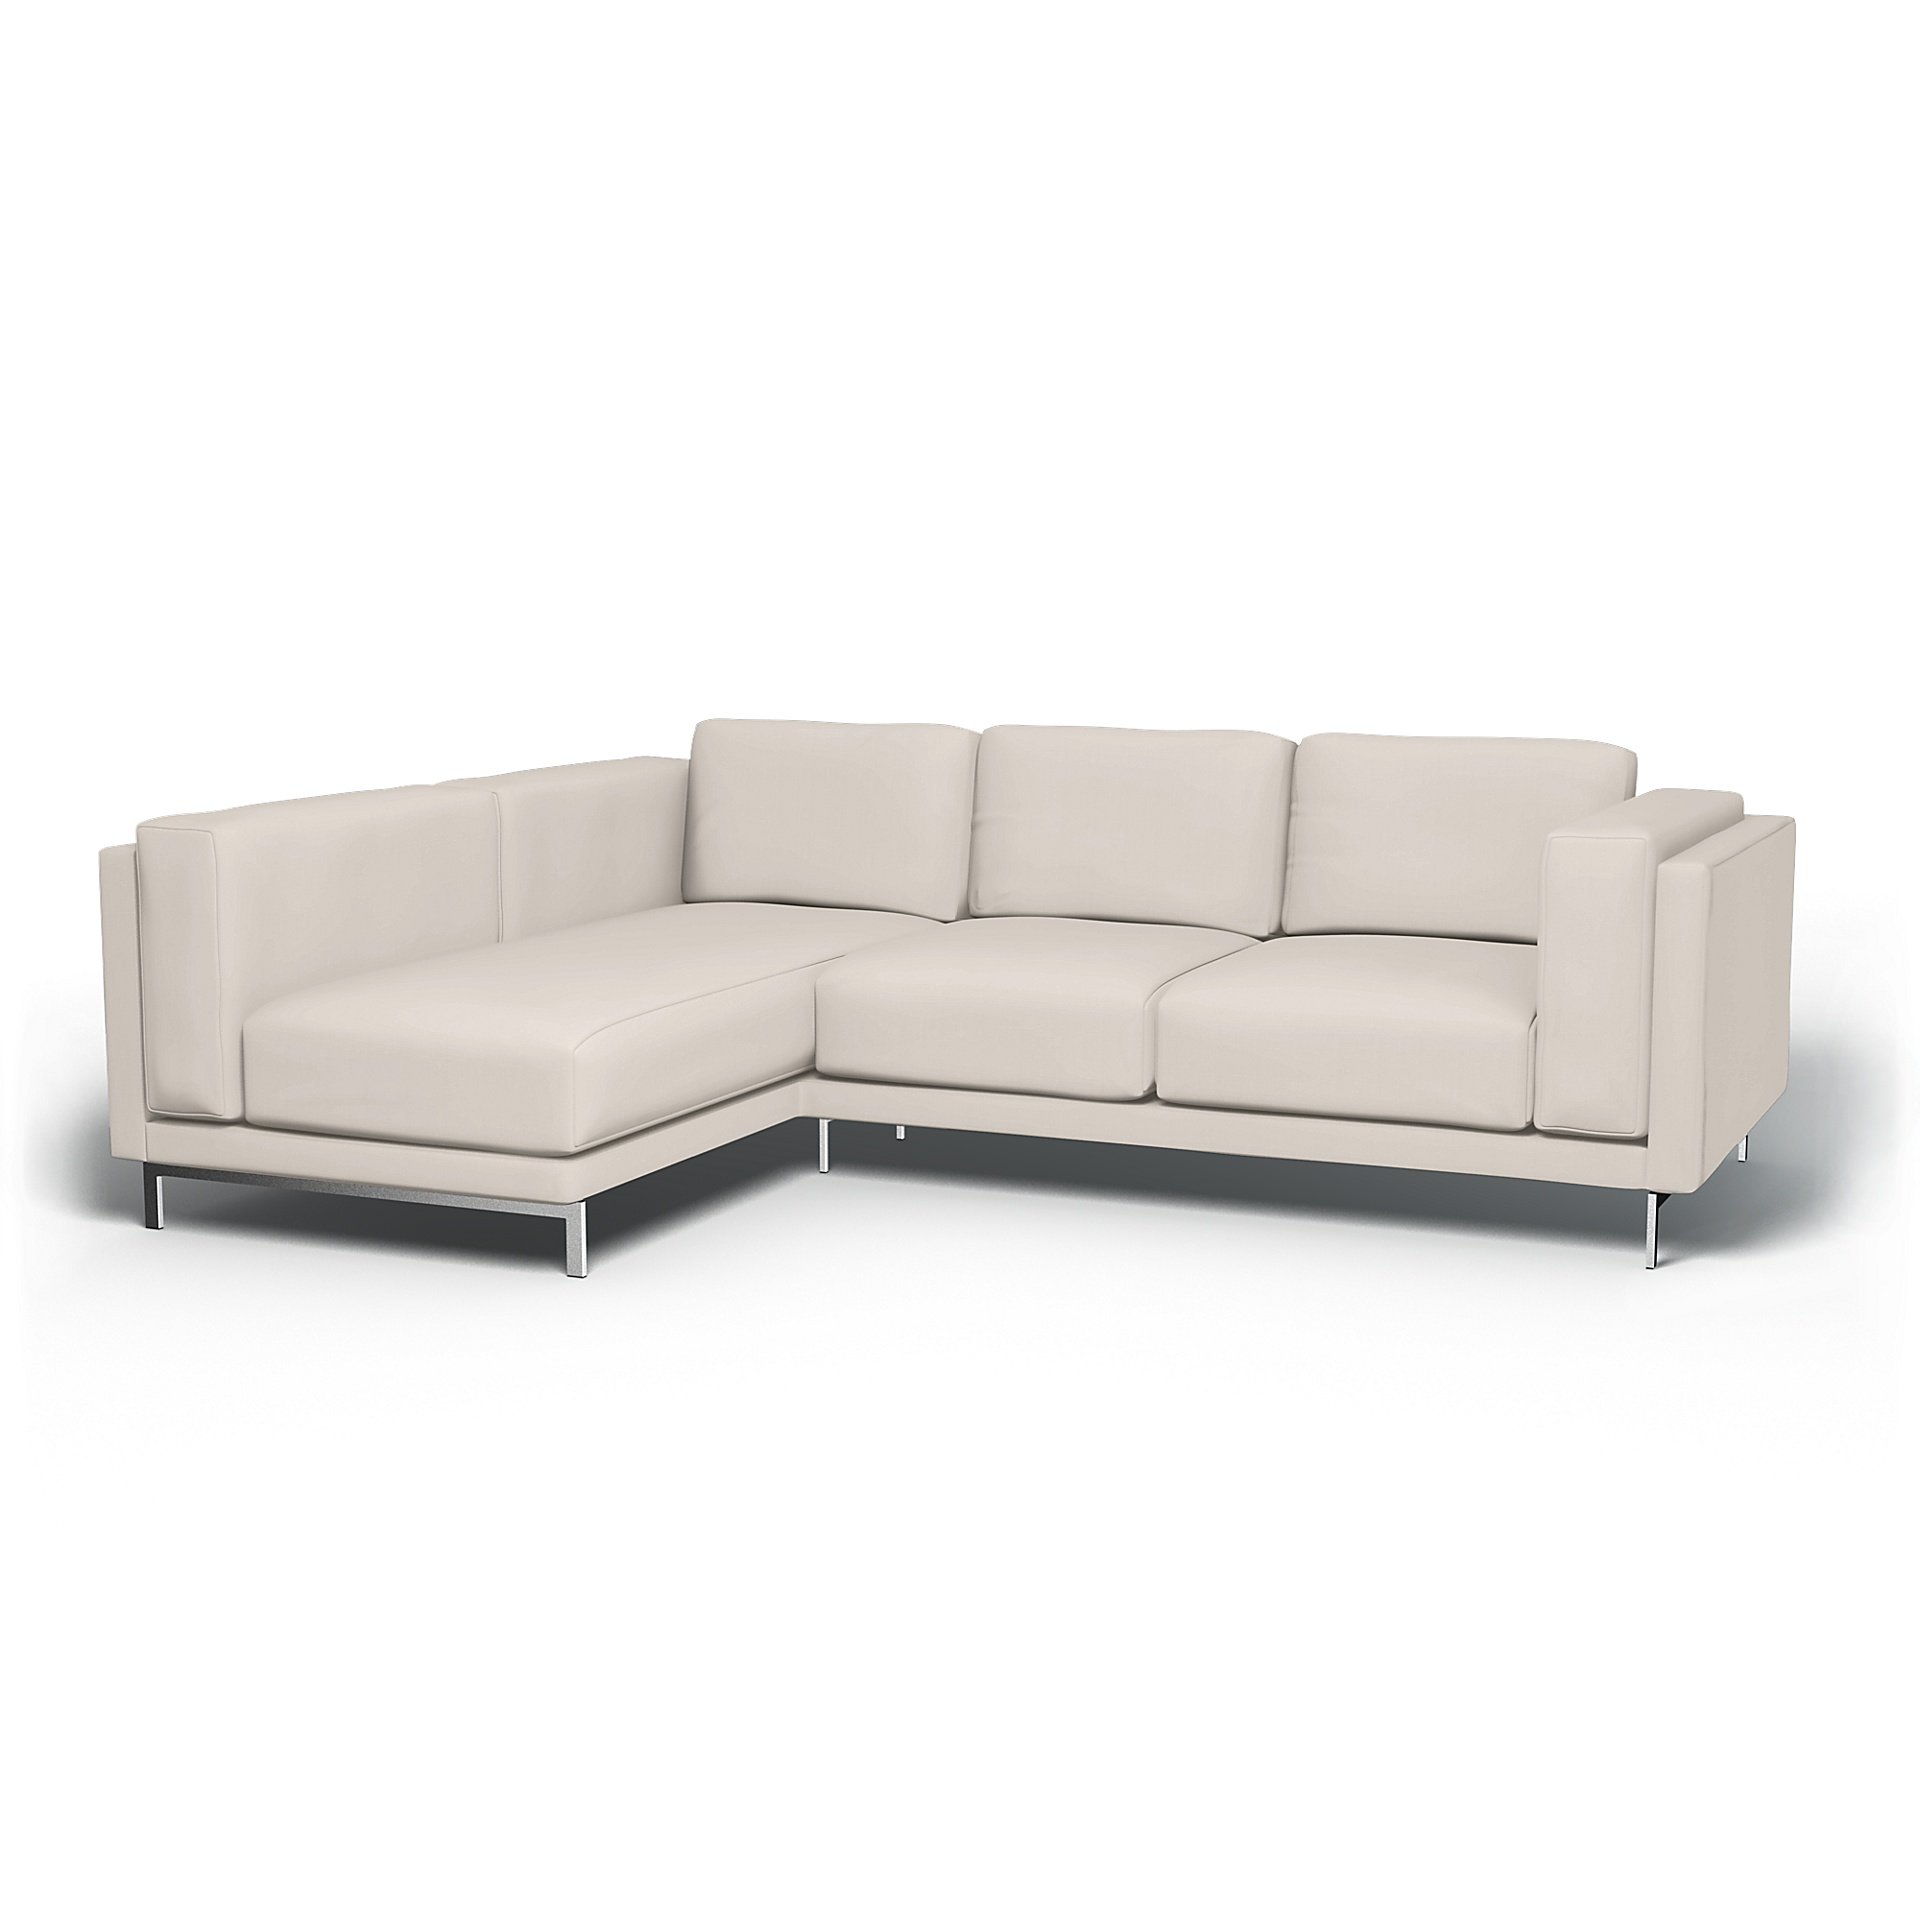 IKEA - Nockeby 3 Seater Sofa with Left Chaise Cover, Soft White, Cotton - Bemz